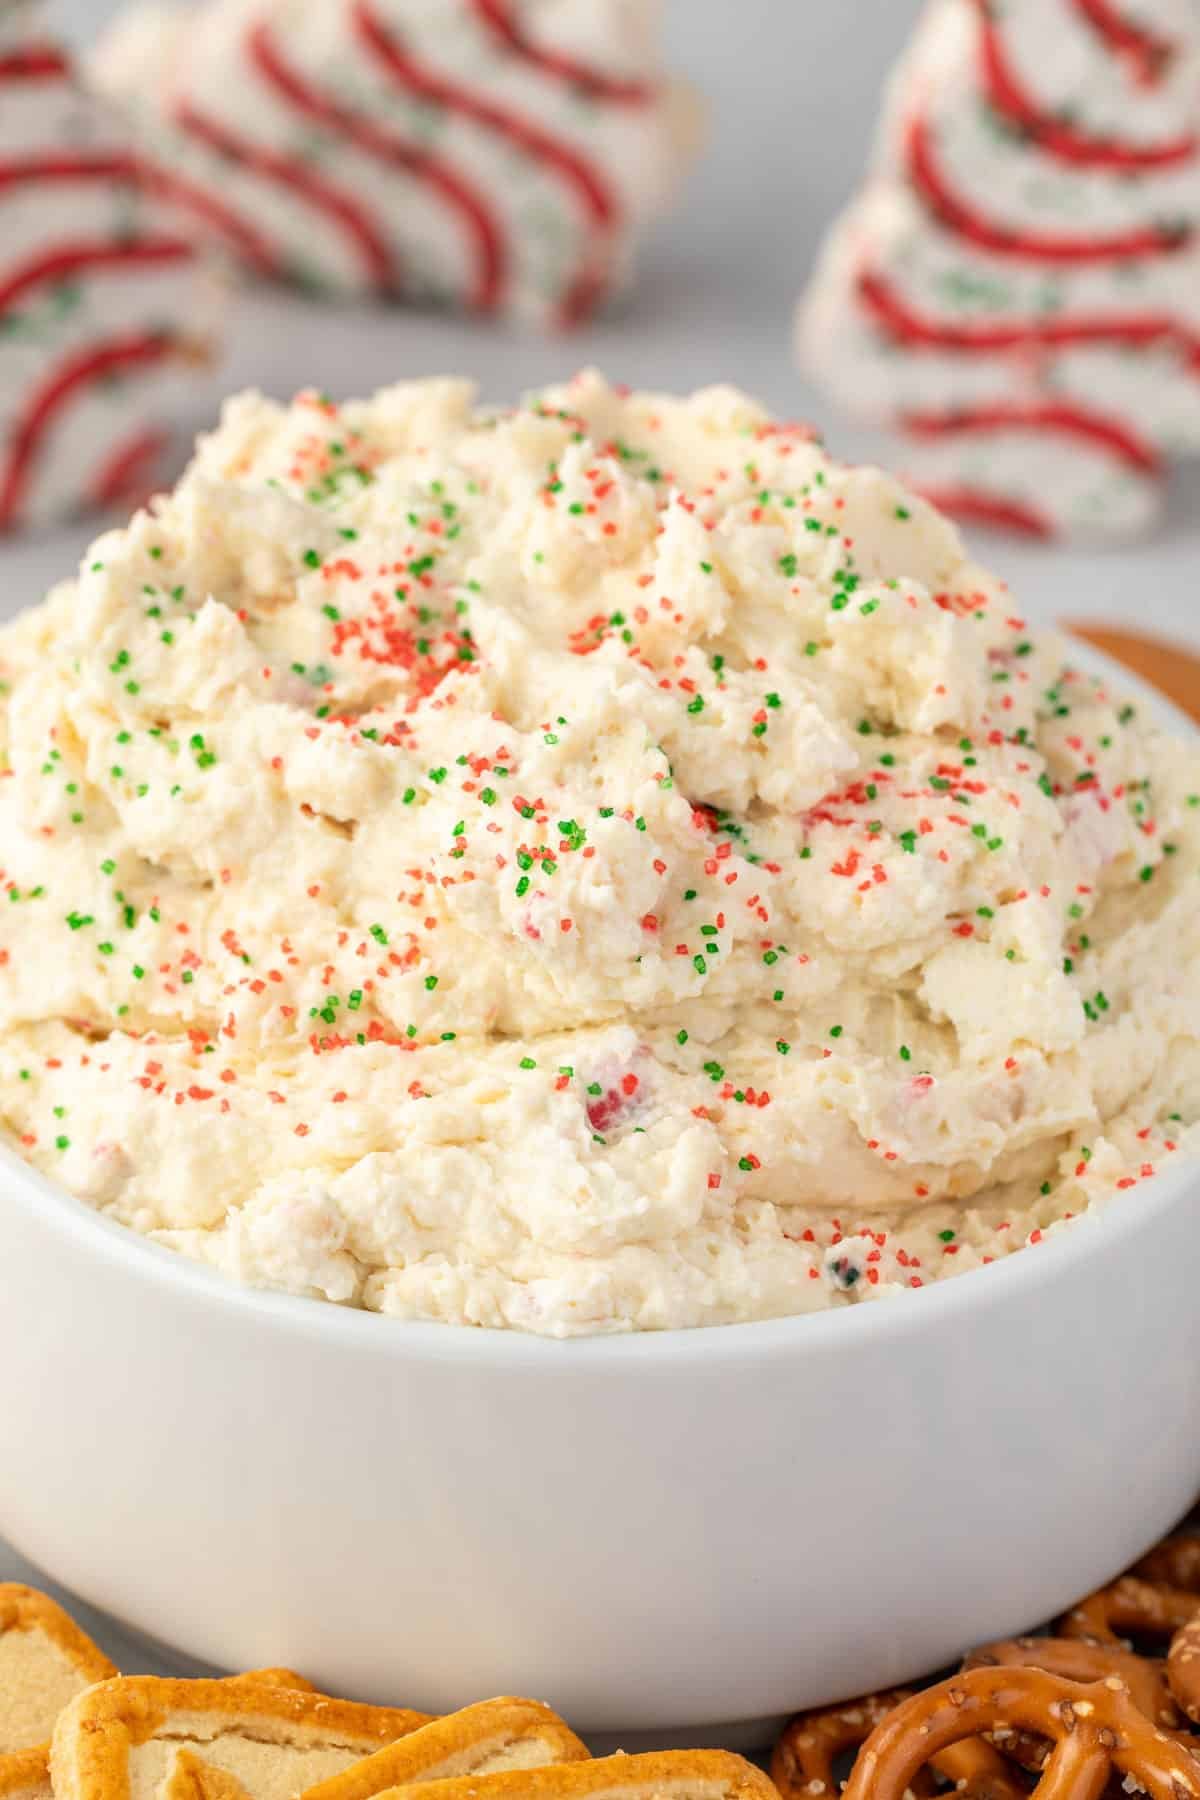 Fluffy Christmas tree cake dip in a white bowl with red and green sprinkles on top.